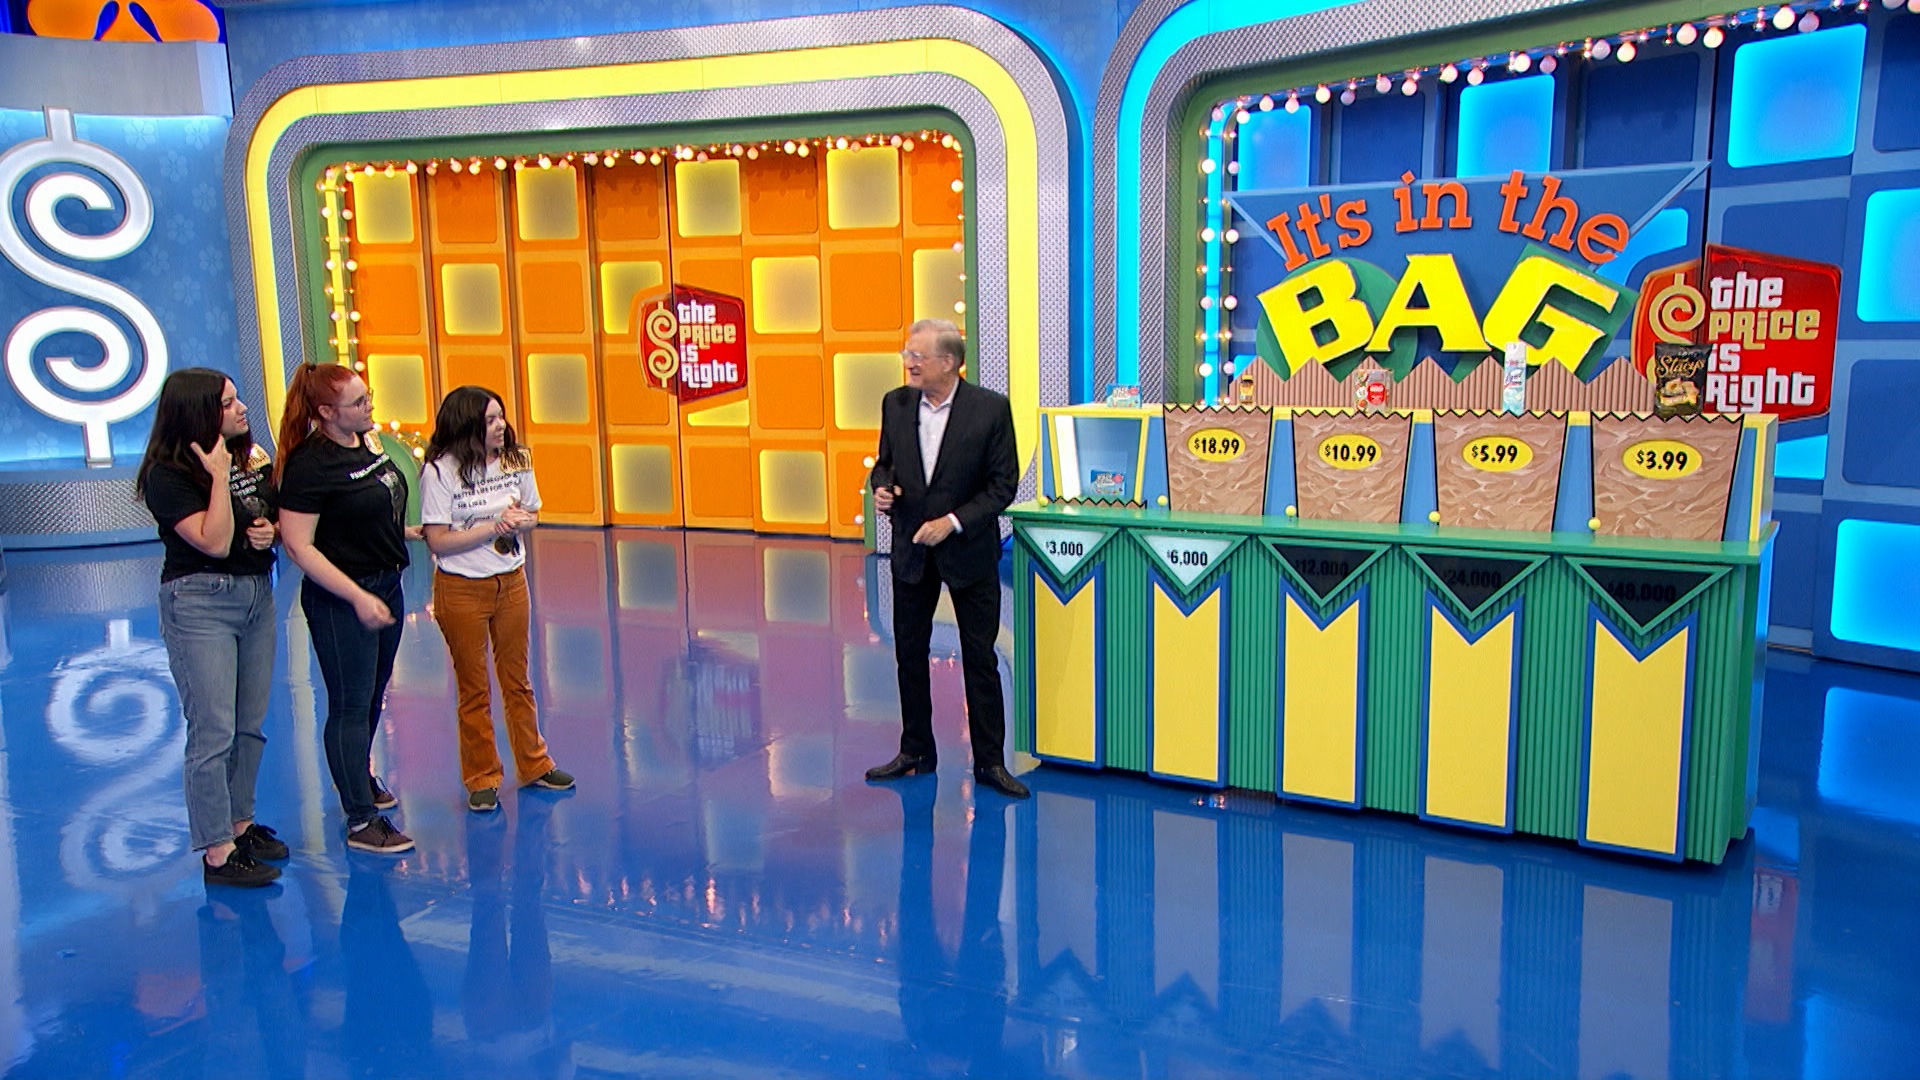 Watch The Price Is Right Season 52 The Price is Right at Night 10/13